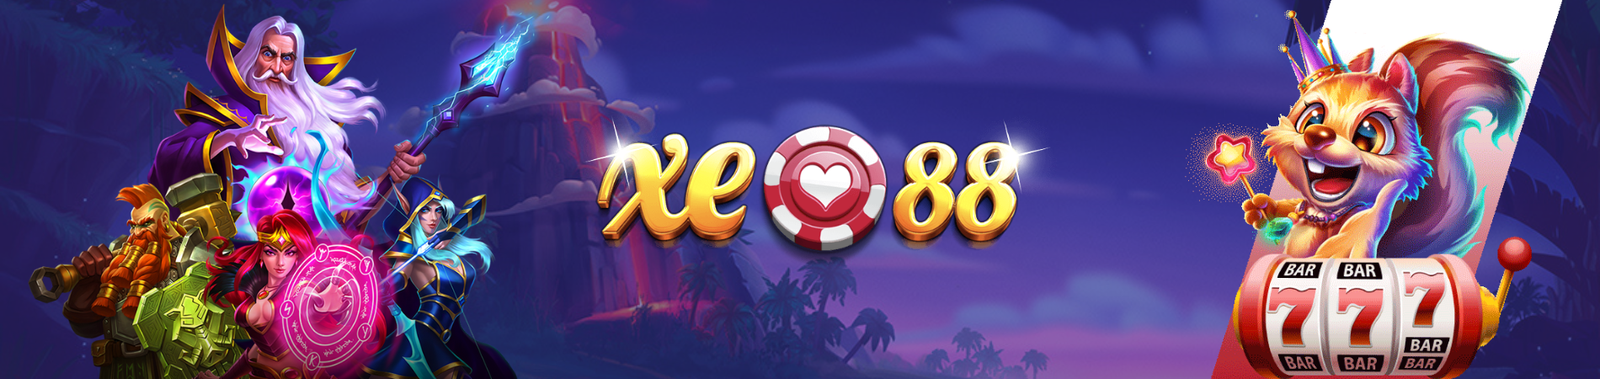 Register at Xe88 Malaysia for Online Casino Games